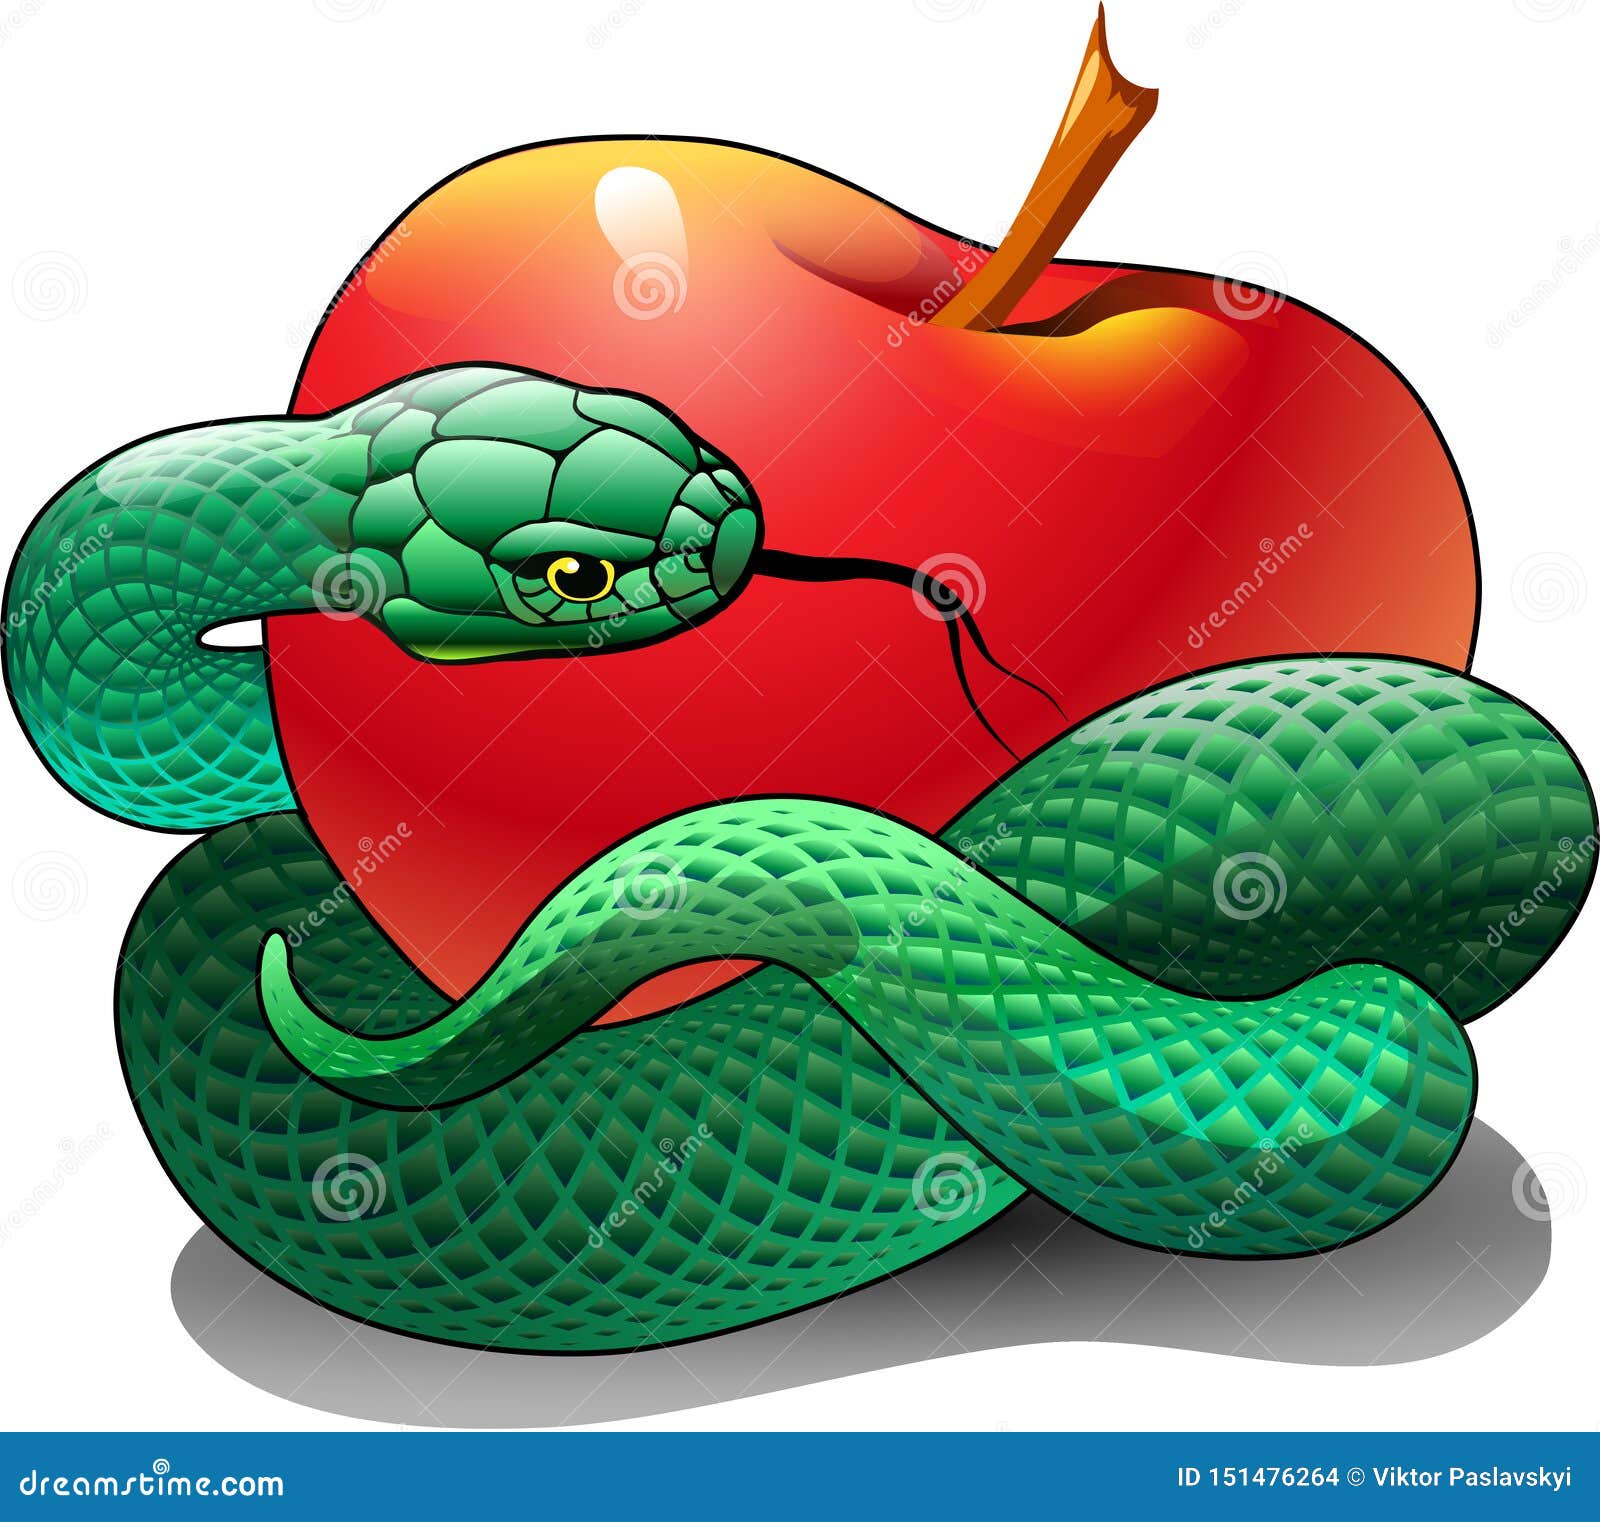 a green snake is wrapped around a red apple